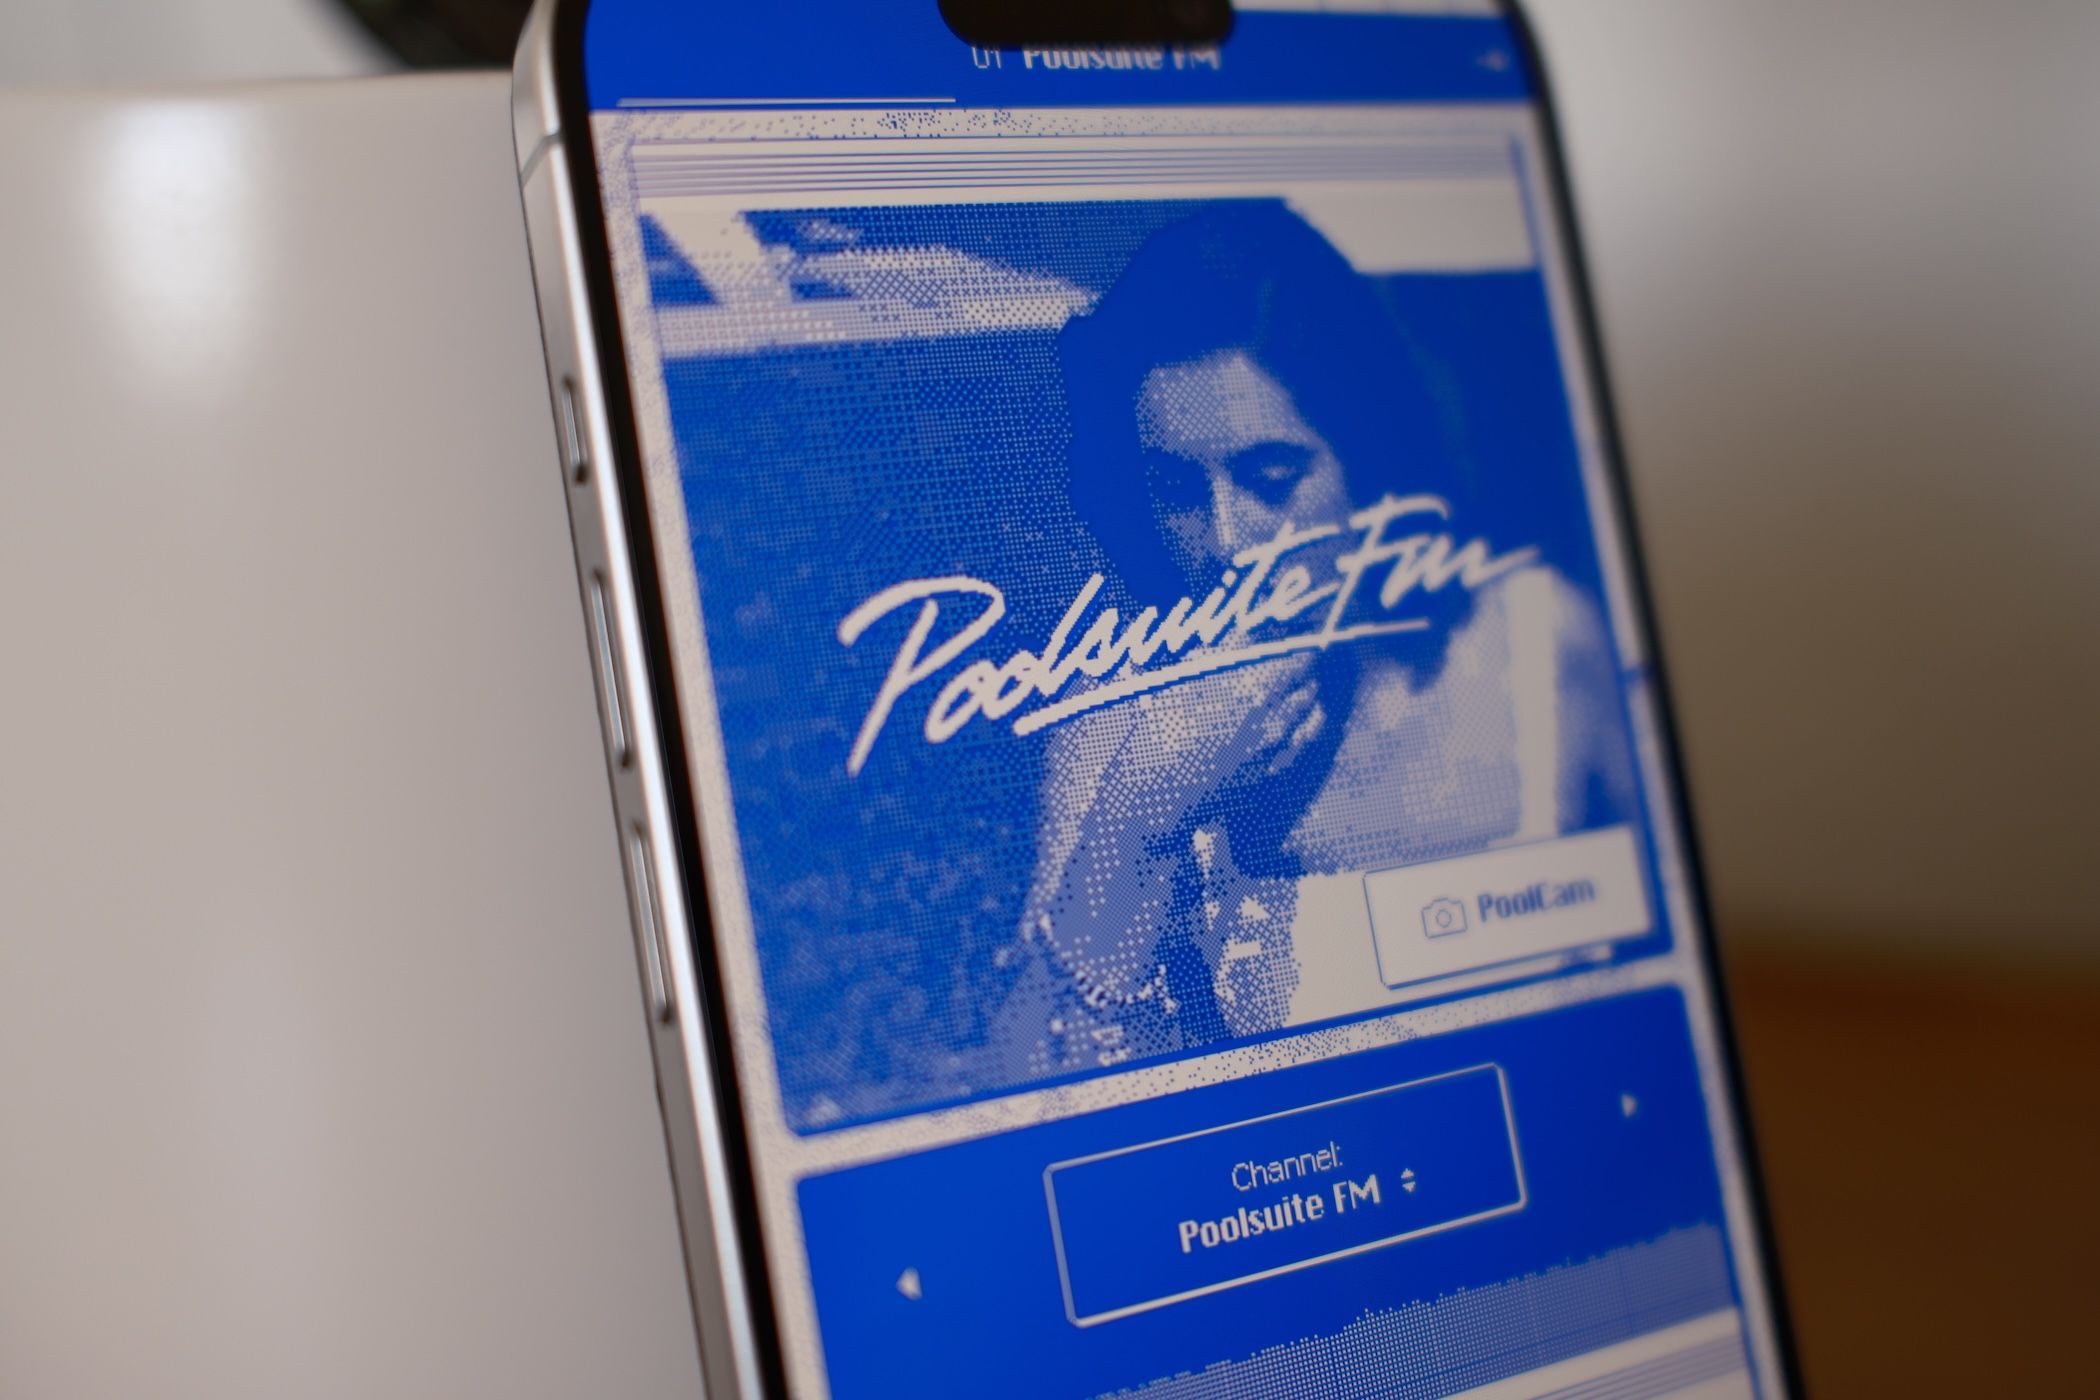 close up of the poolsuite fm iphone app